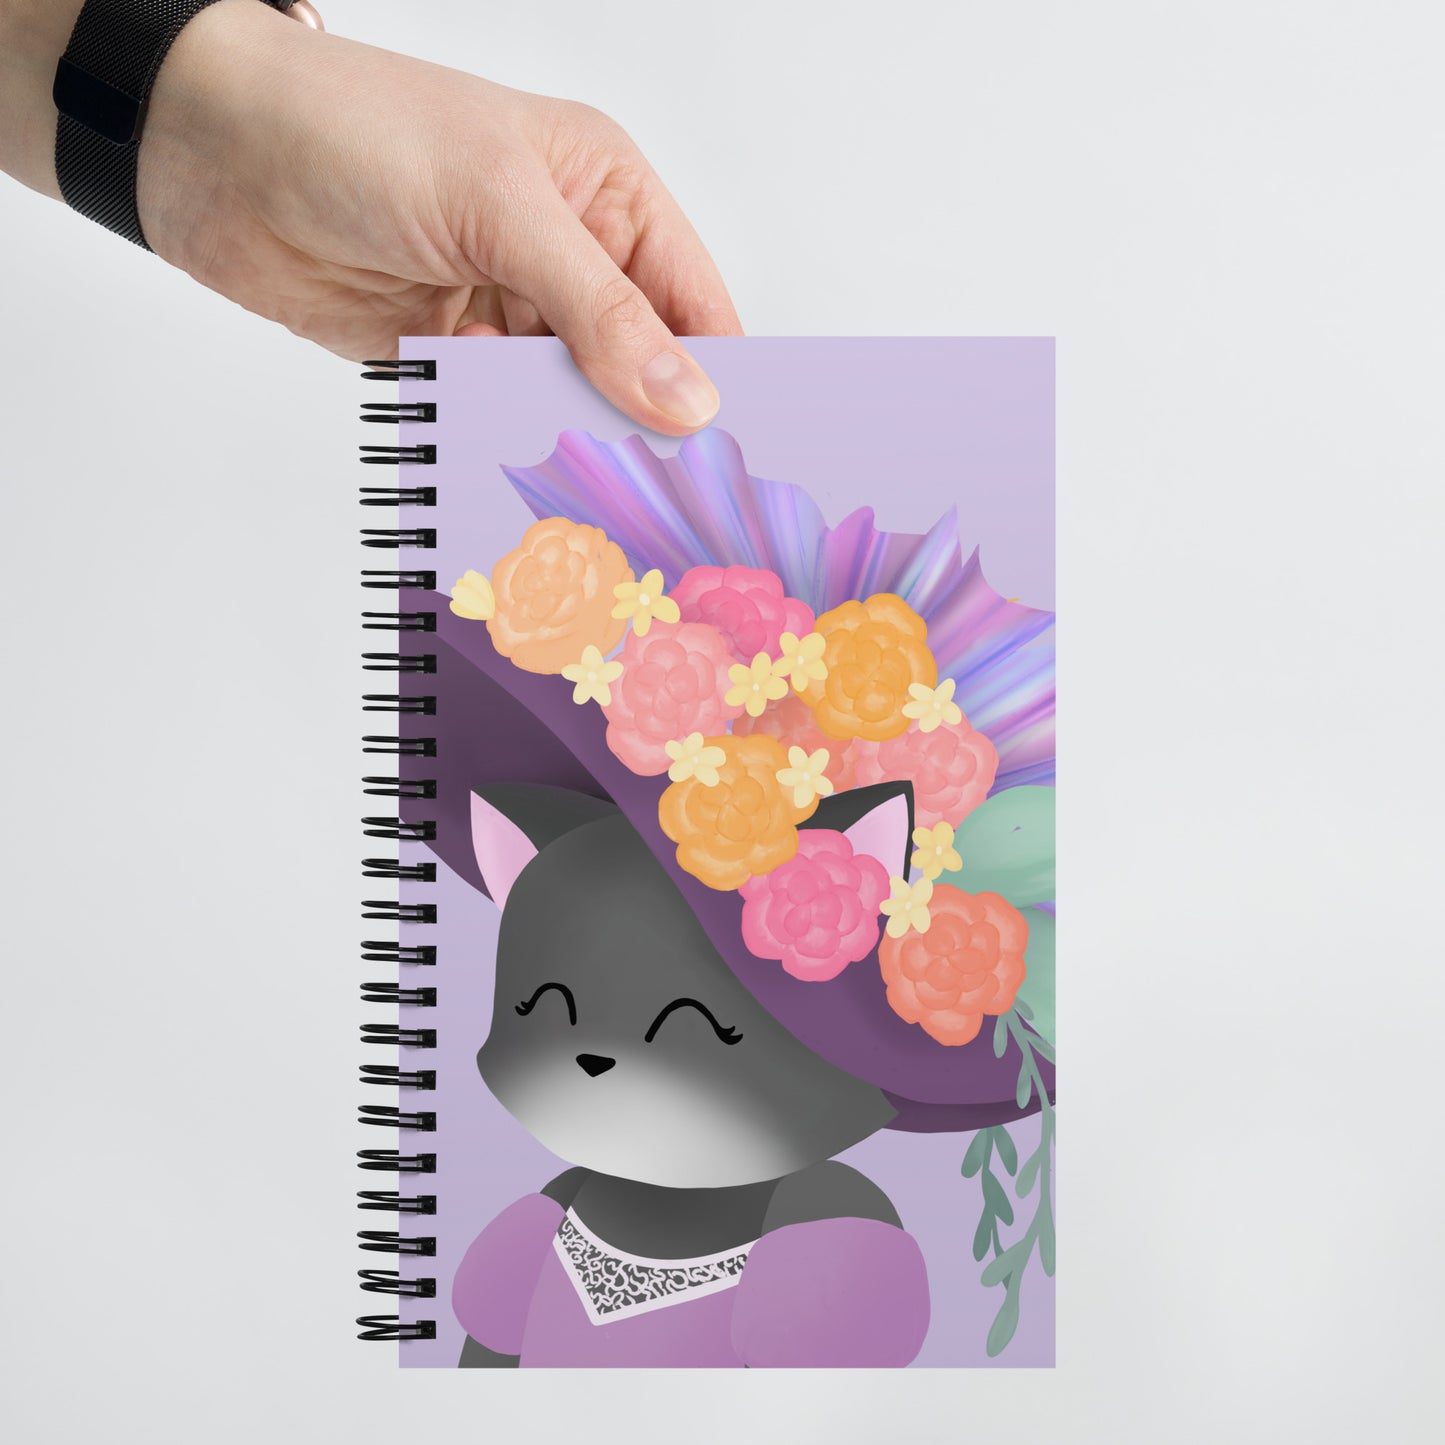 Vintage Floral Hat Kitty Notebook